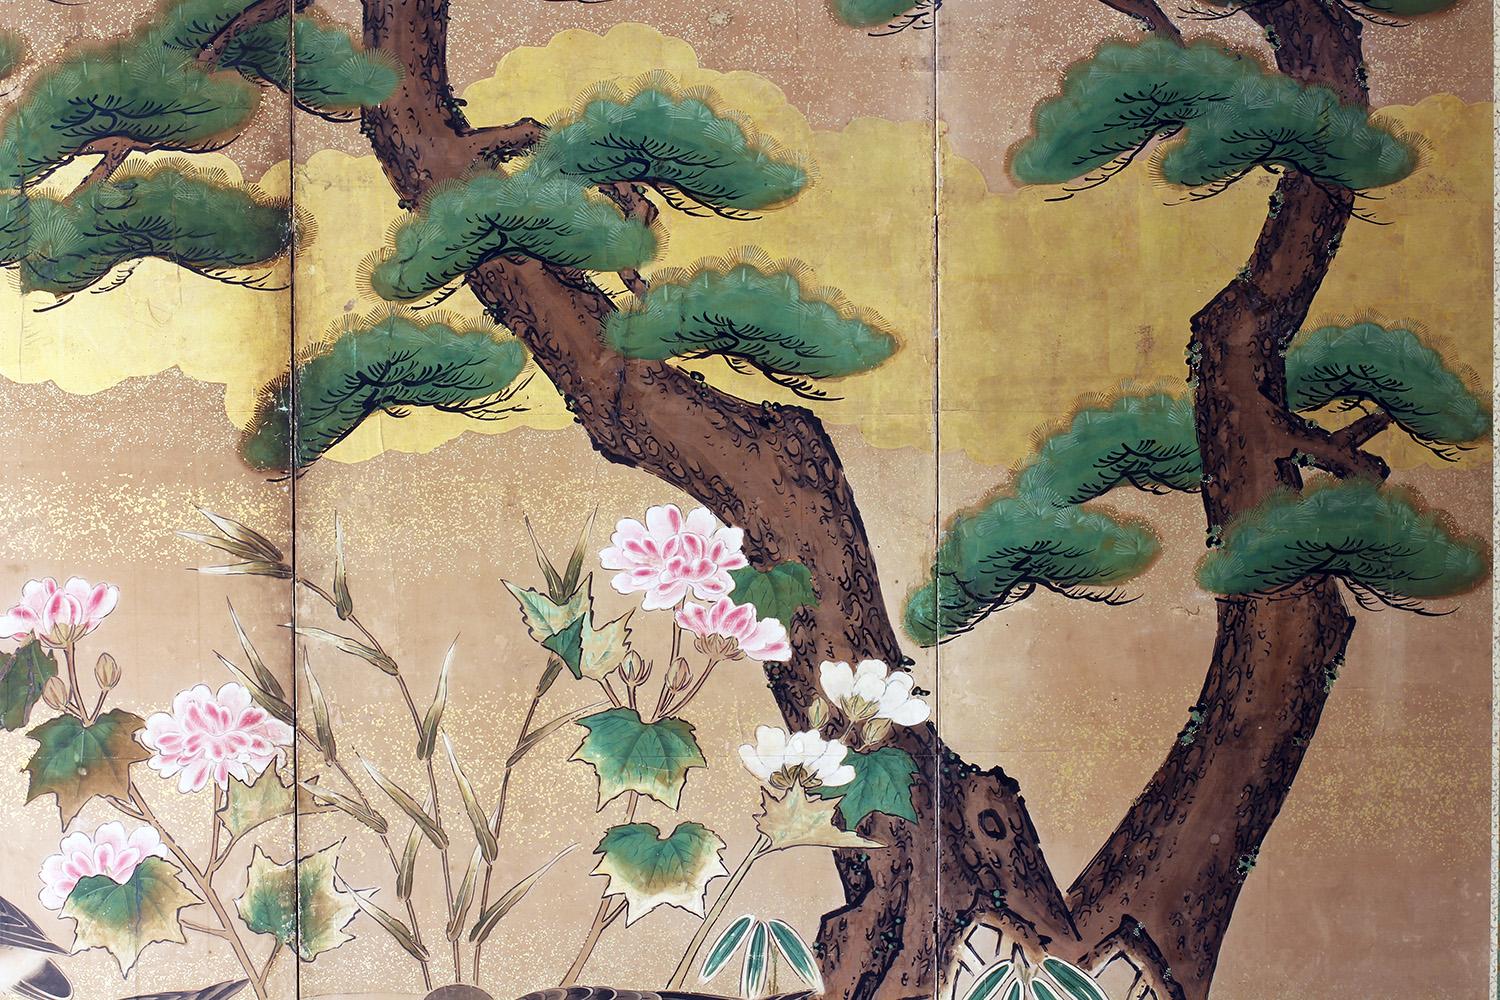 This Japanese screen is a beautiful example of a landscape with pine trees, peonies and ducks in the water, it releases a pleasant feeling of relaxation.
The work is from the early 19th century, full Edo period, the artist is unknown but from the